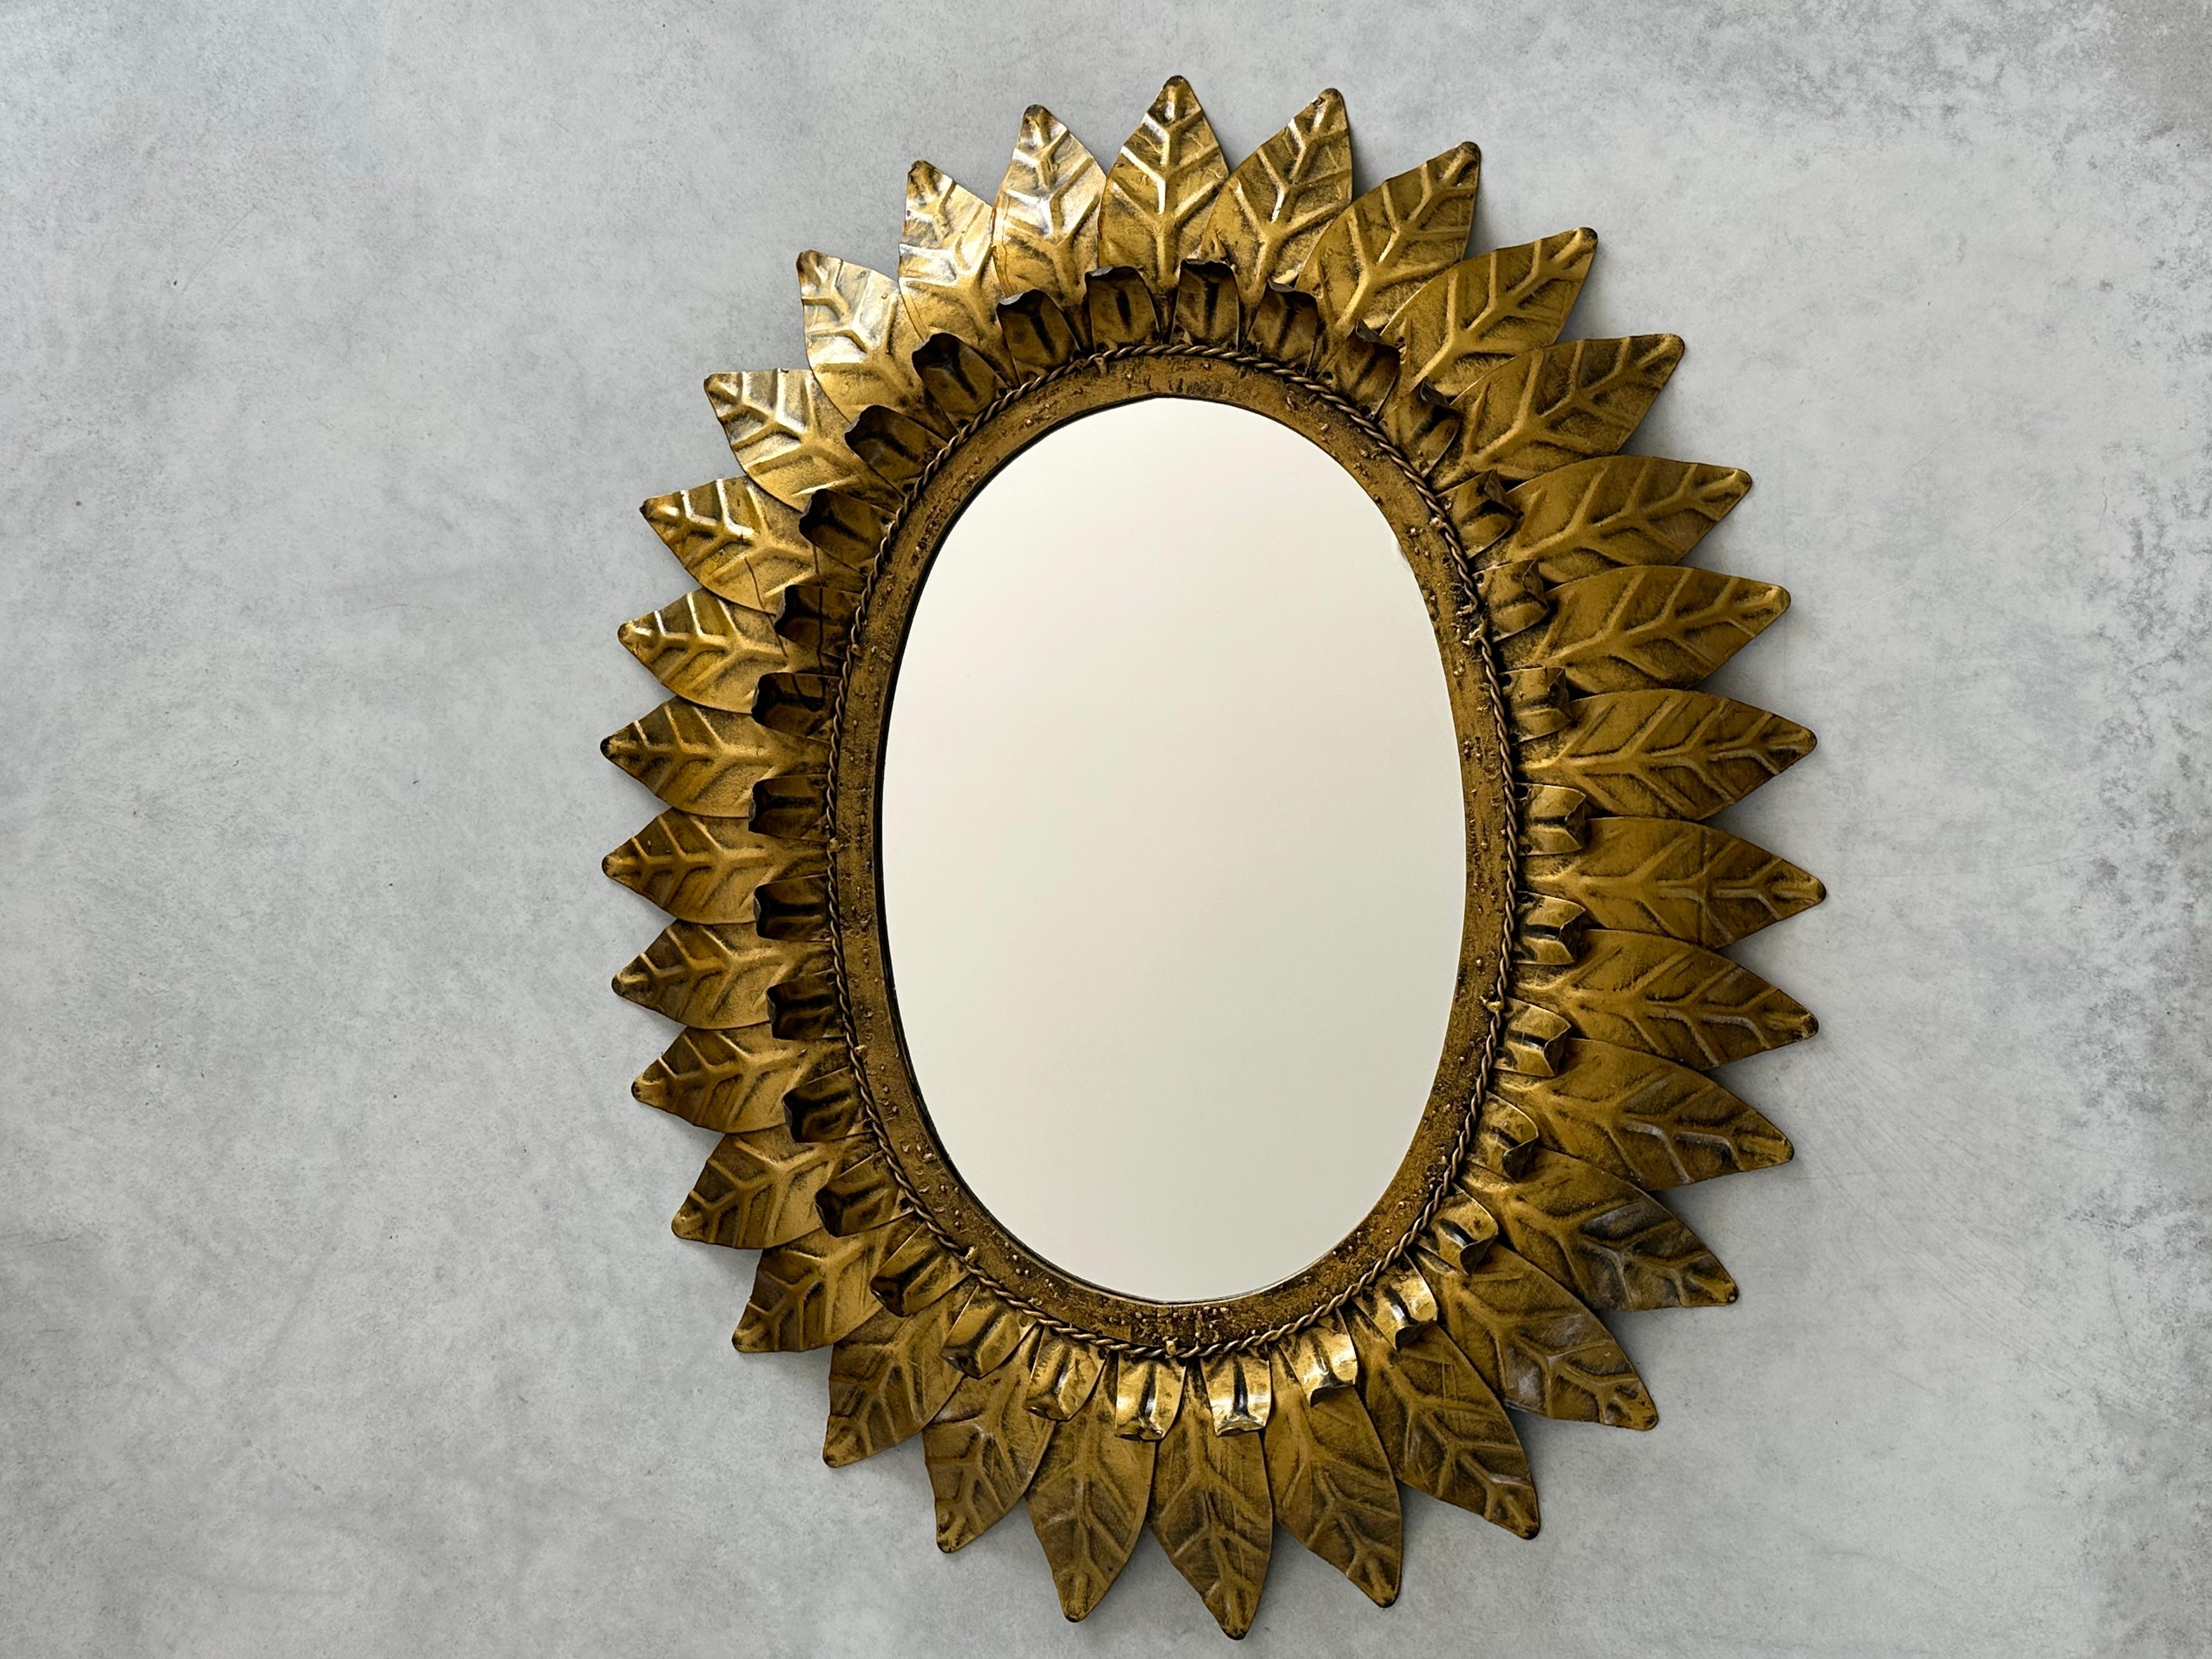 Big sunburst mirror in gold metal framed with gold-colored leaves.

This highly decorative oval sunburst mirror framed with elegant curved leaves in two sizes.

This mirror is in excellent vintage condition and has a beautiful aged patina.

General